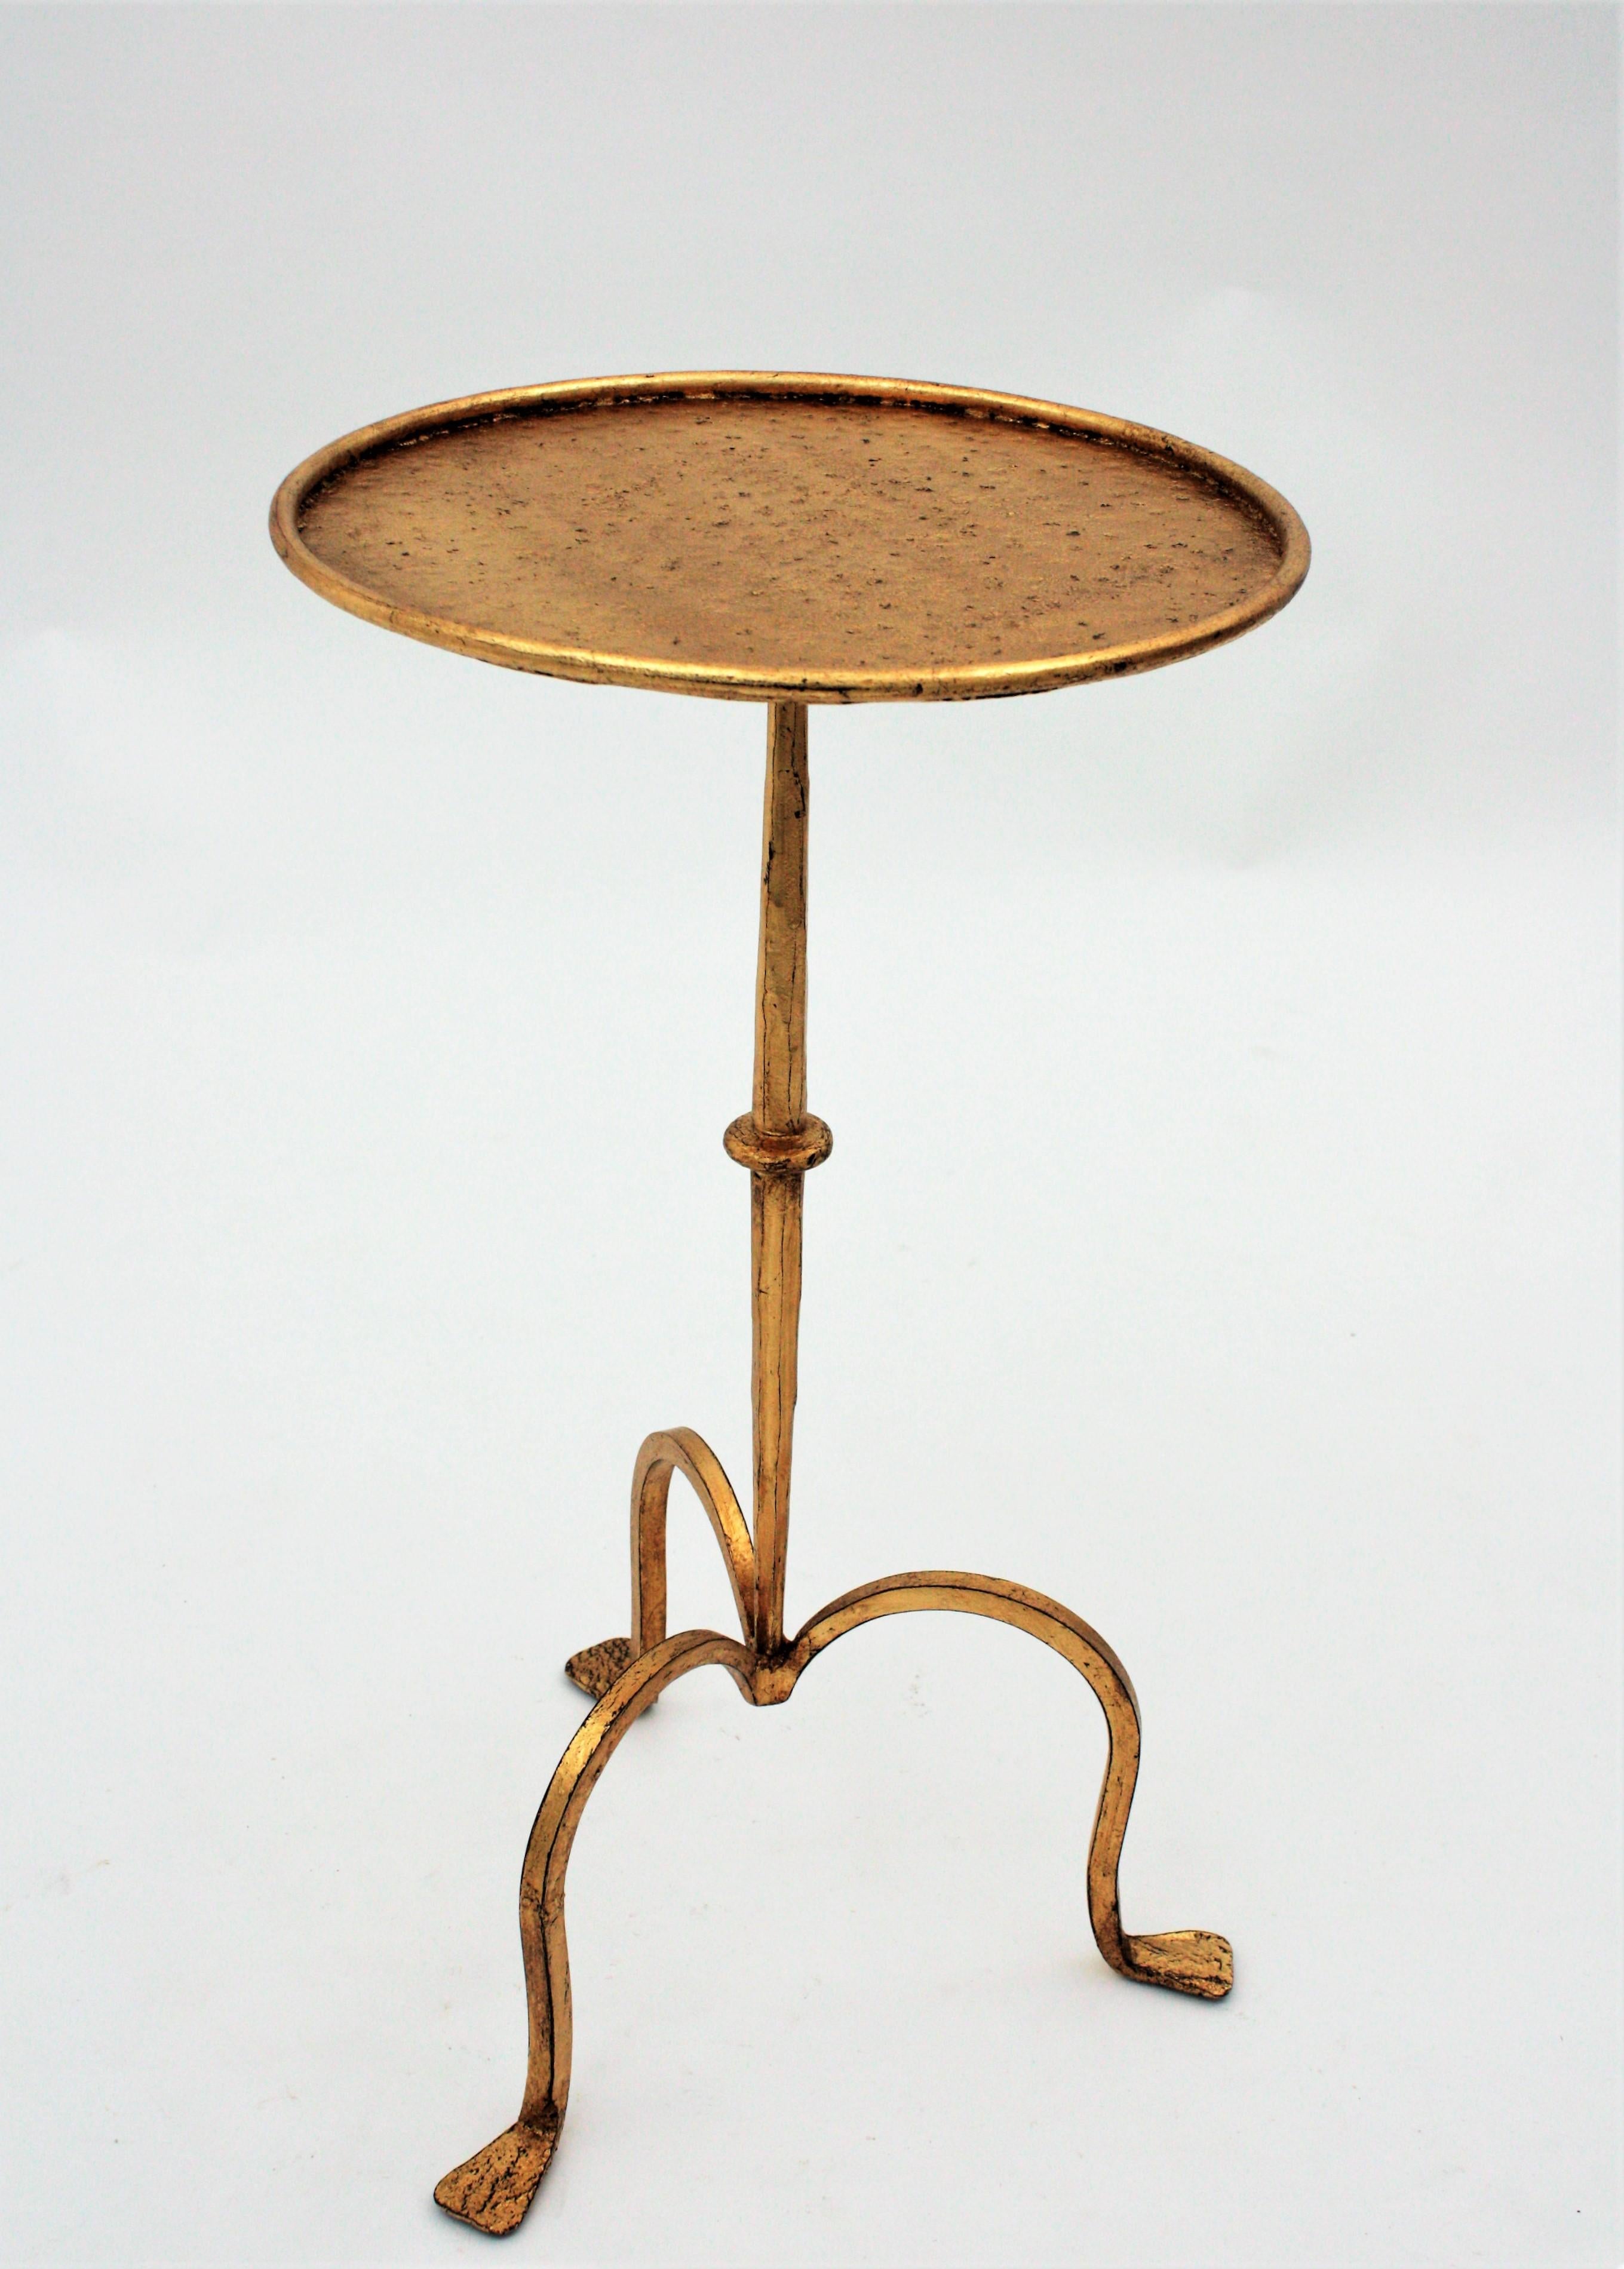 Wrought Iron Spanish Large Wrought Gilt Iron Gueridon Drinks Table, Side Table or Pedestal